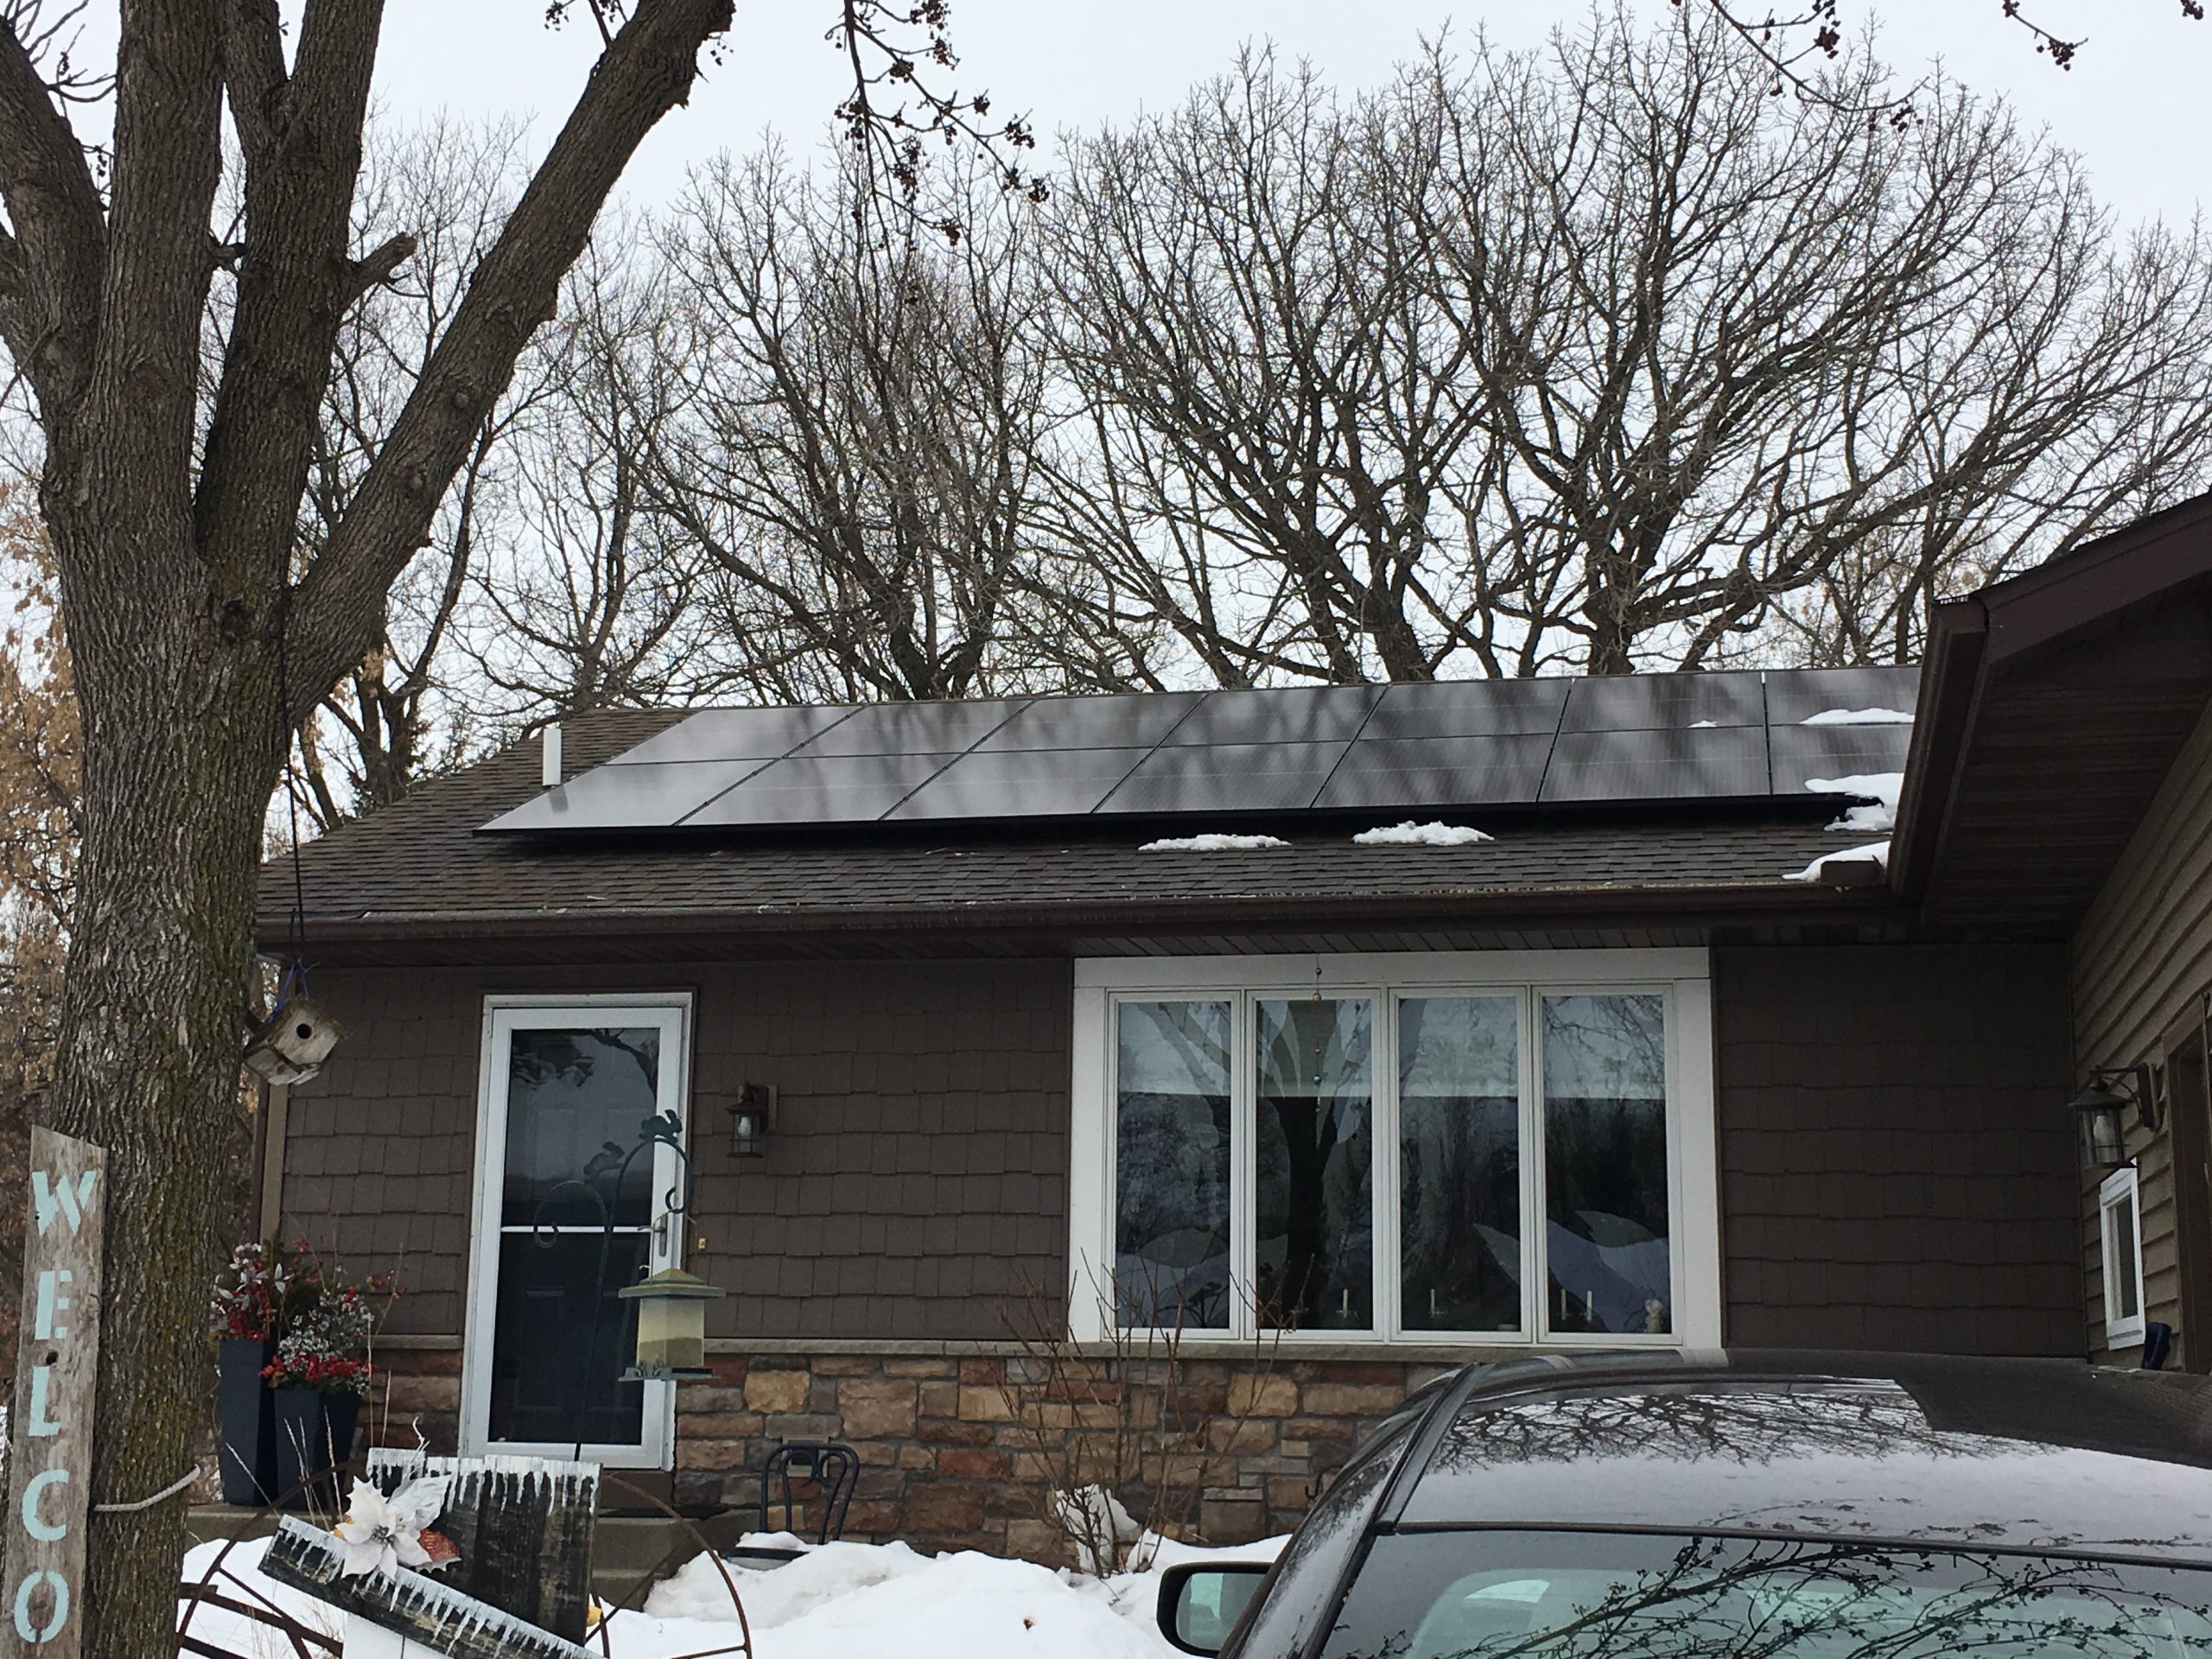 Norwood Young America, MN 10.89kW Rooftop Solar